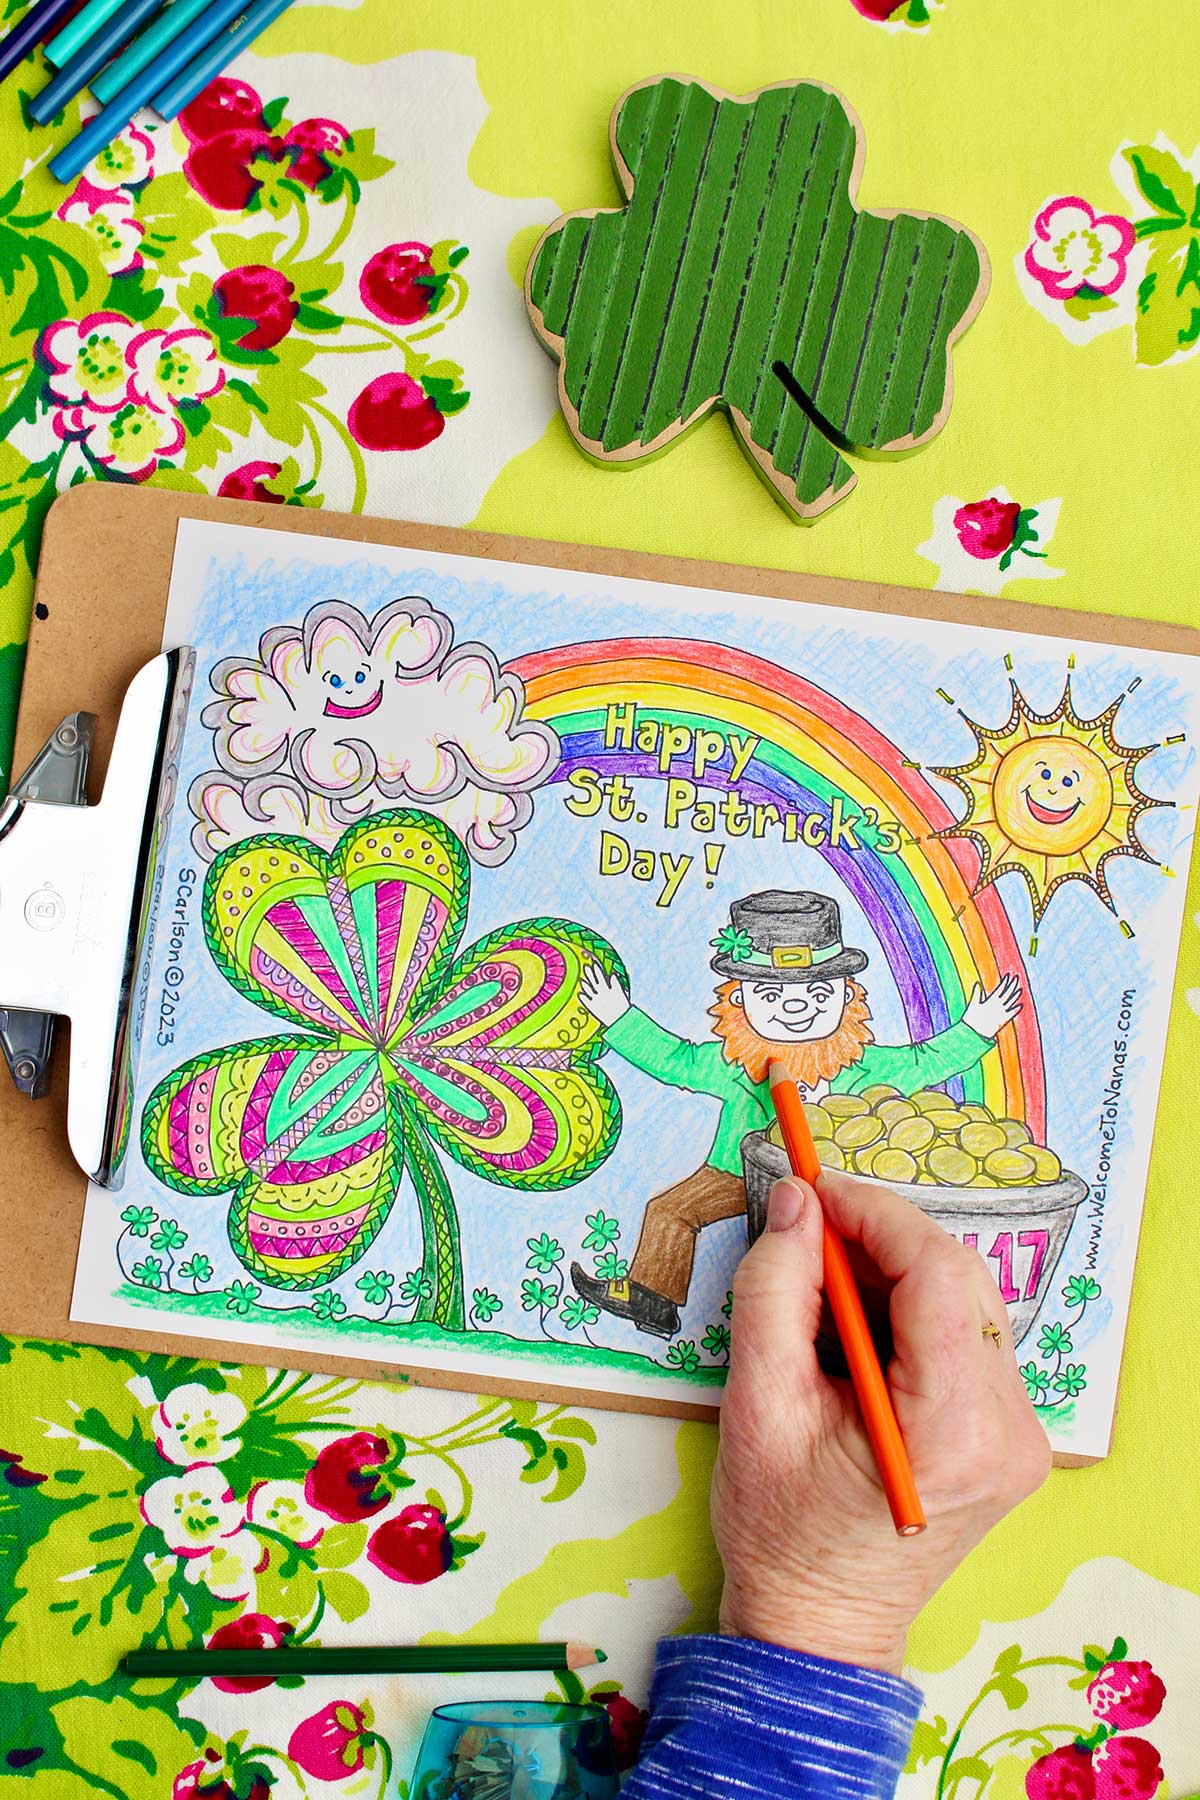 Hand putting finishing touches on leprechaun's orange beard in St. Patrick's coloring page.